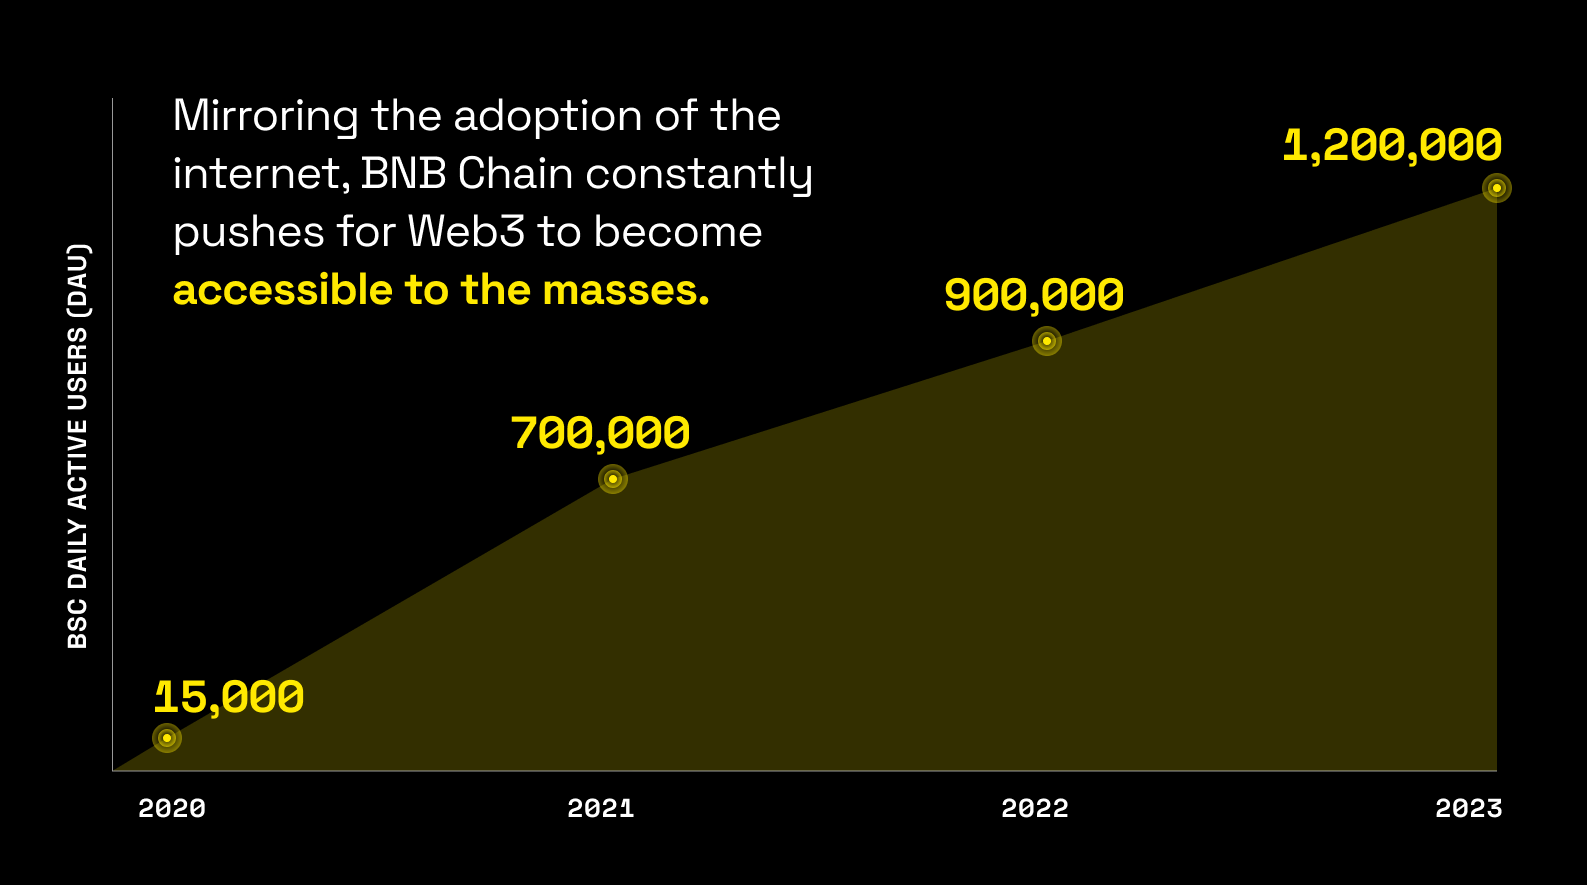 BNB Chain passes 1 million daily active users